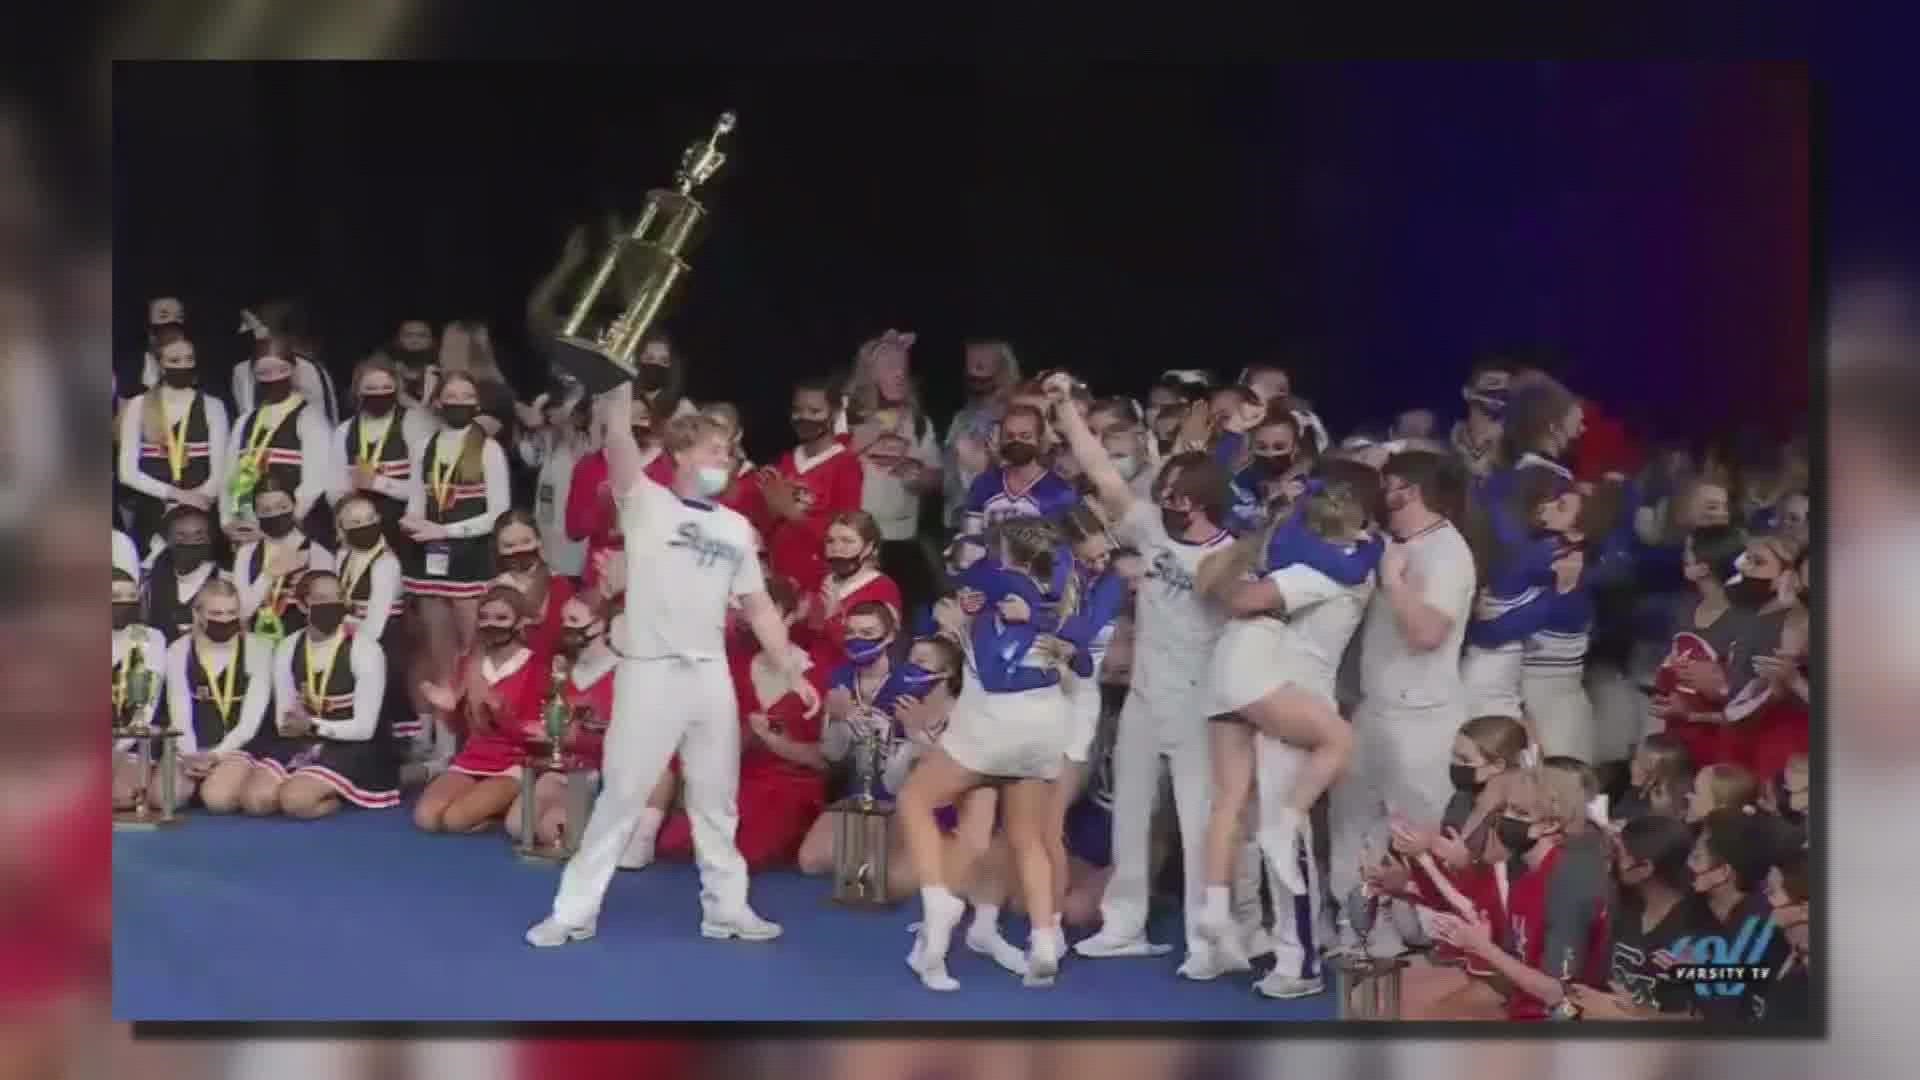 33 Mandeville students are on the team that won at the UCA National Cheer High School Competetion.